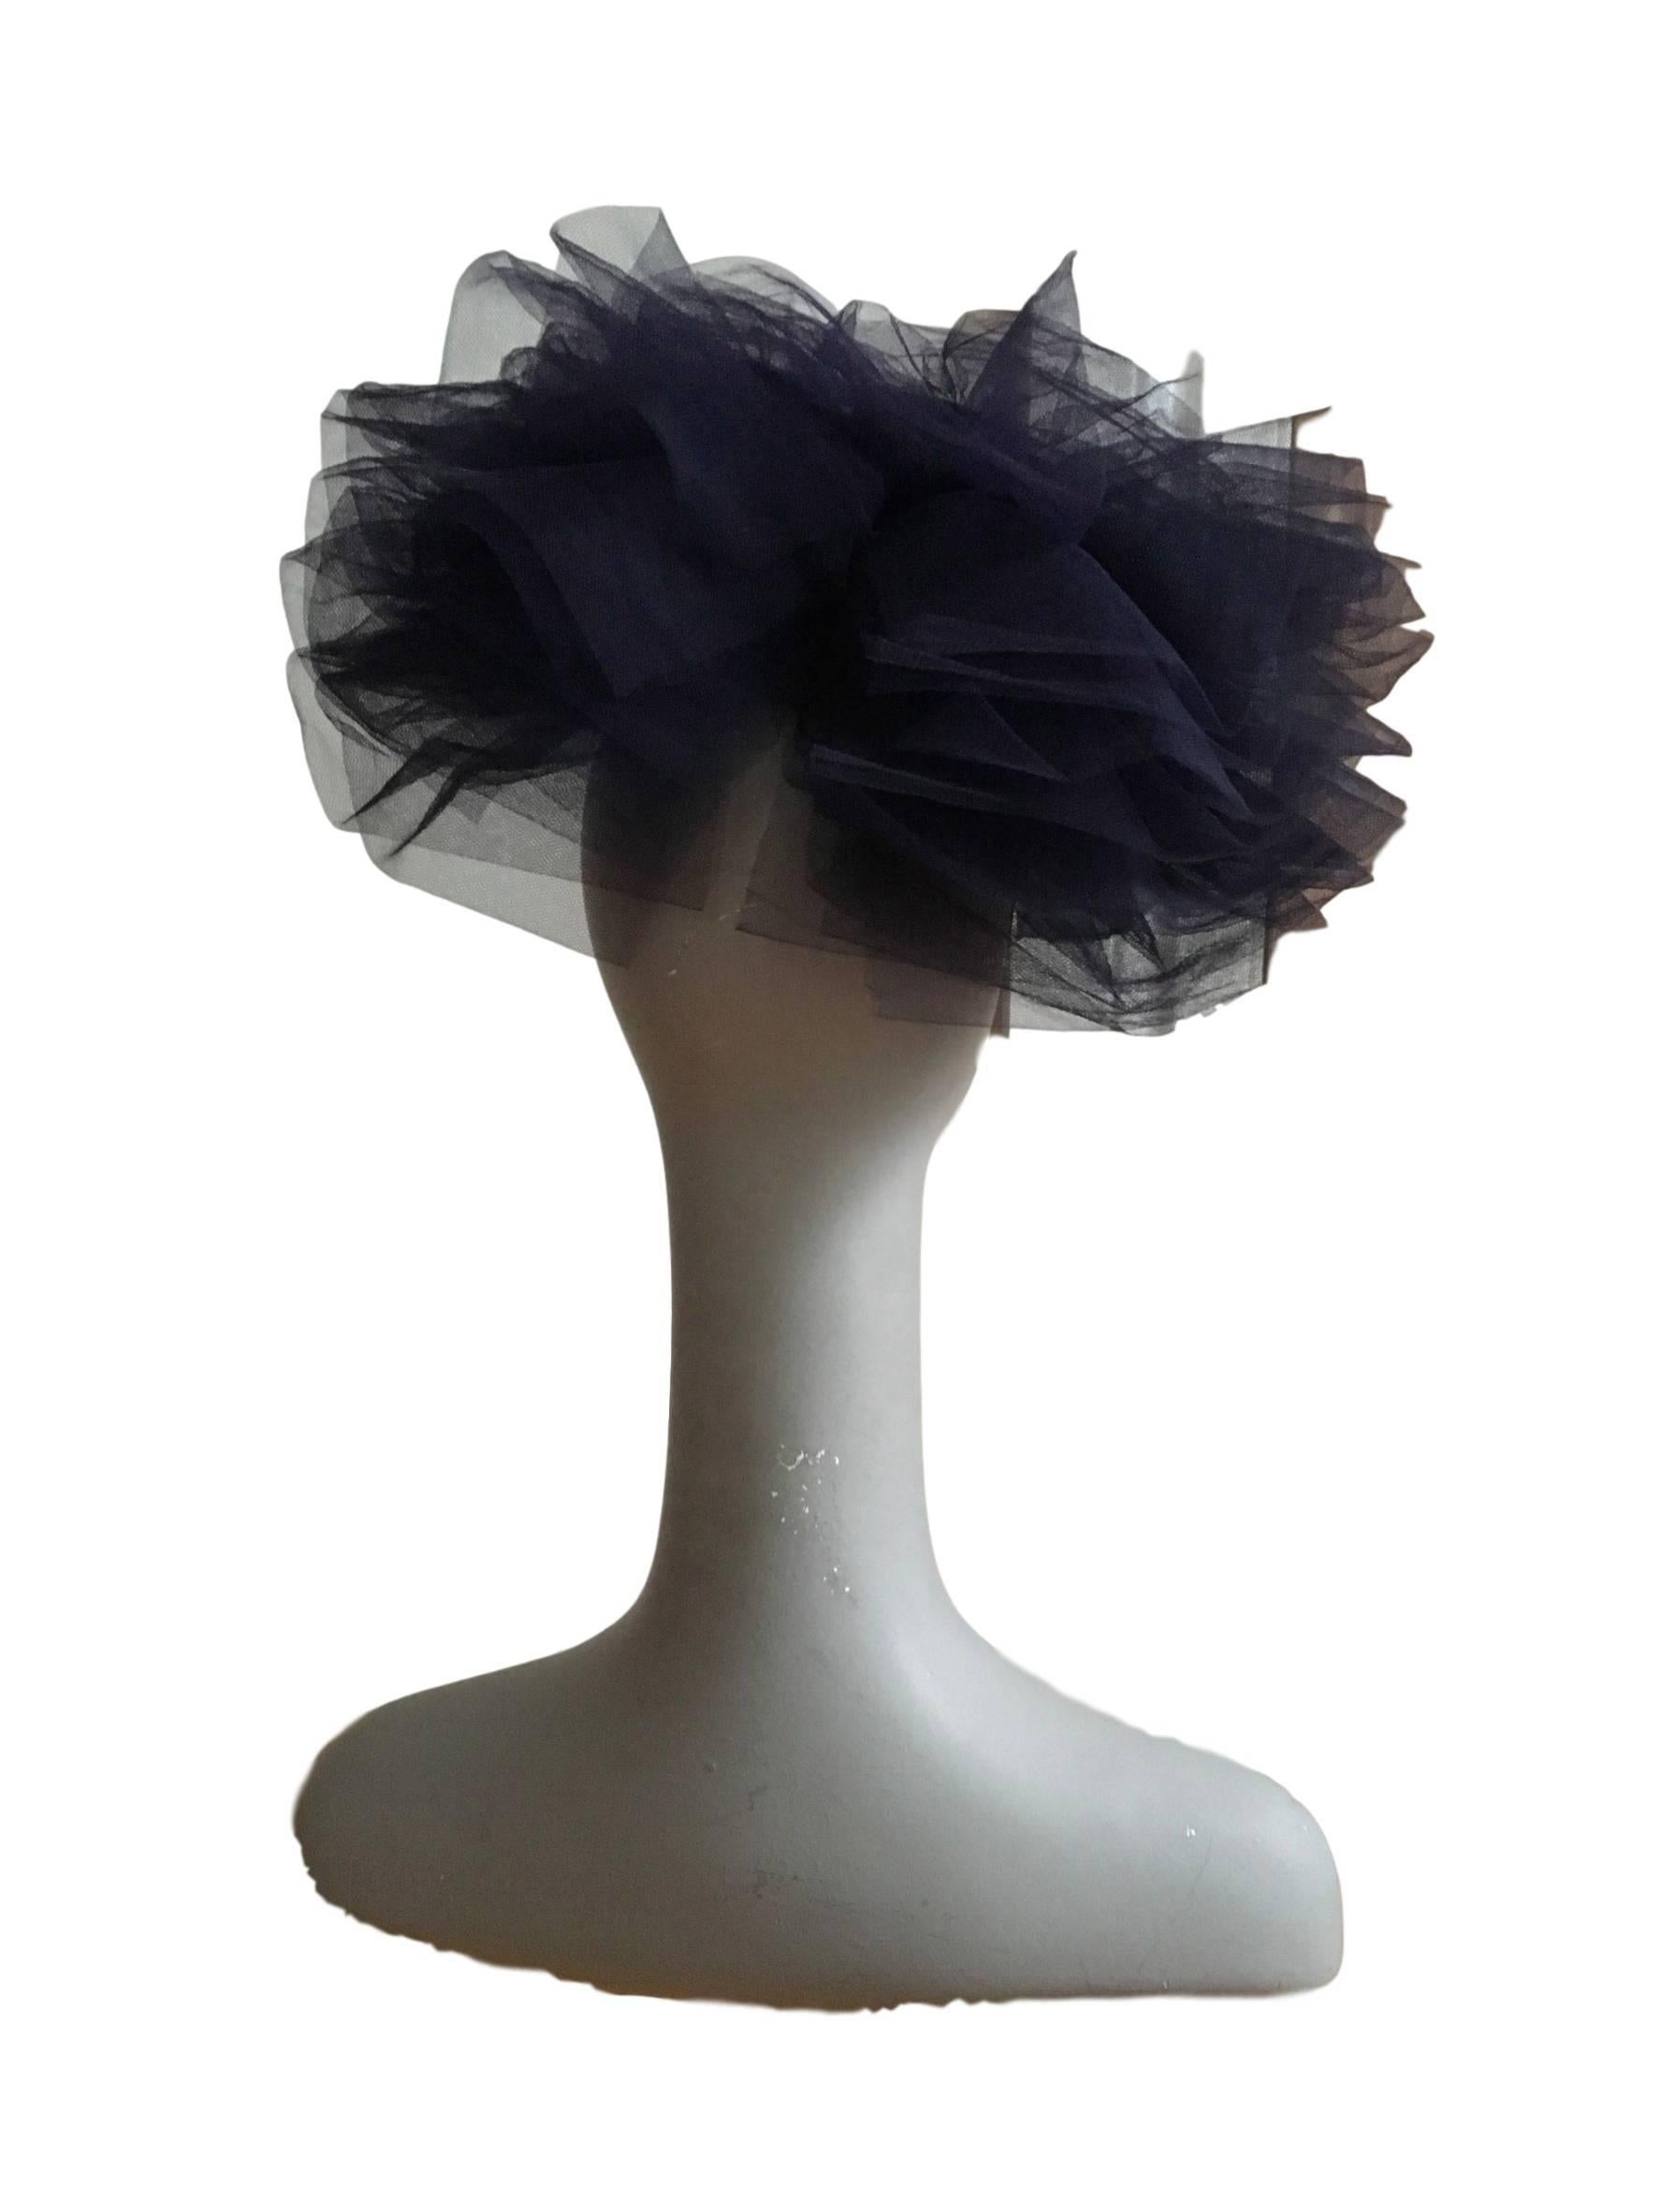 1950s/60s J Marti Marti navy blue layered mesh hat/fascinator, has central crown with comb catch and elasticated chin strap. 

Measures 14 inches across whole hat, crown is 6 x 5 inches, and 8 inches height of whole piece.

In excellent